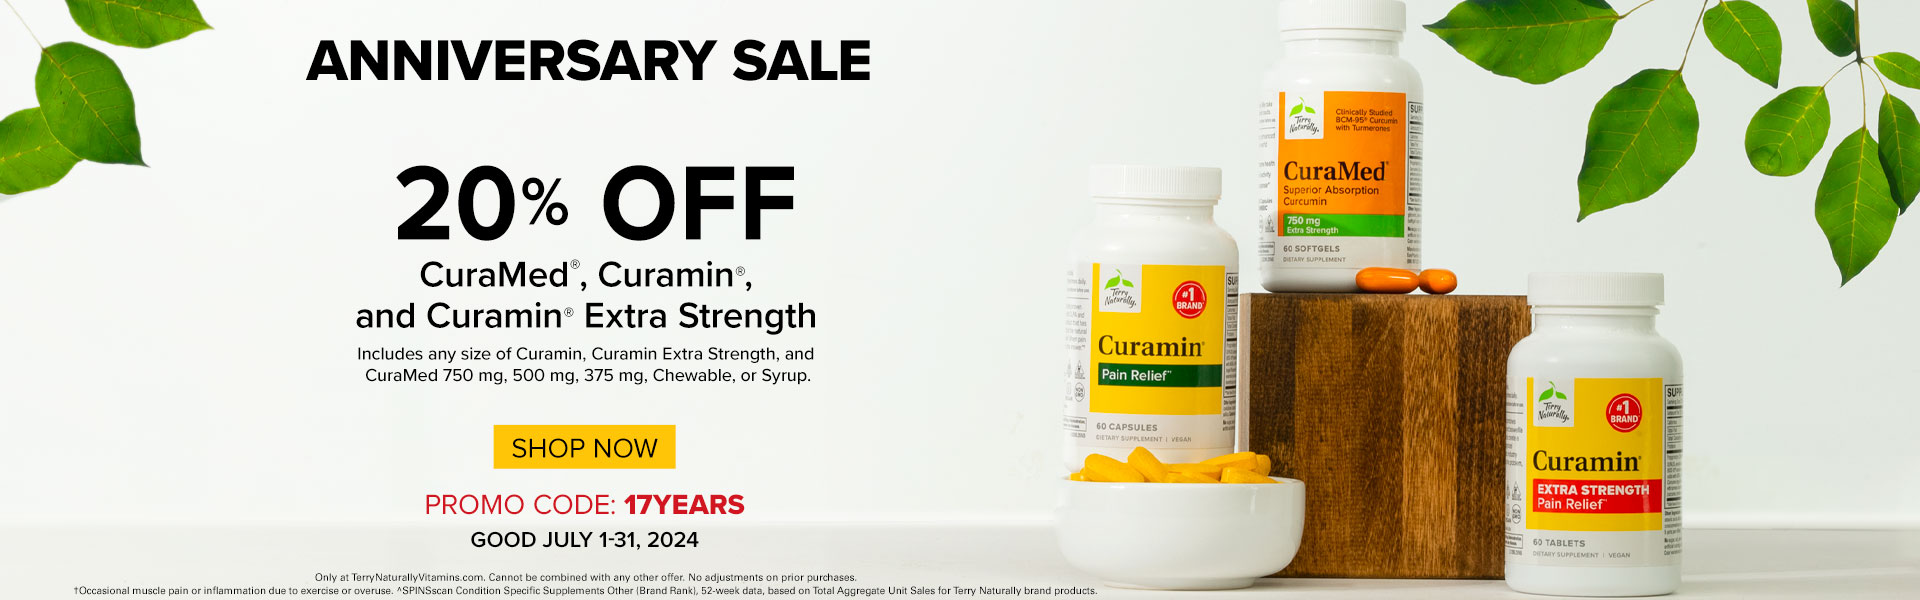 ANNIVERSARY SALE • 20% Off CuraMed®, Curamin®, and Curamin® Extra Strength • SHOP NOW